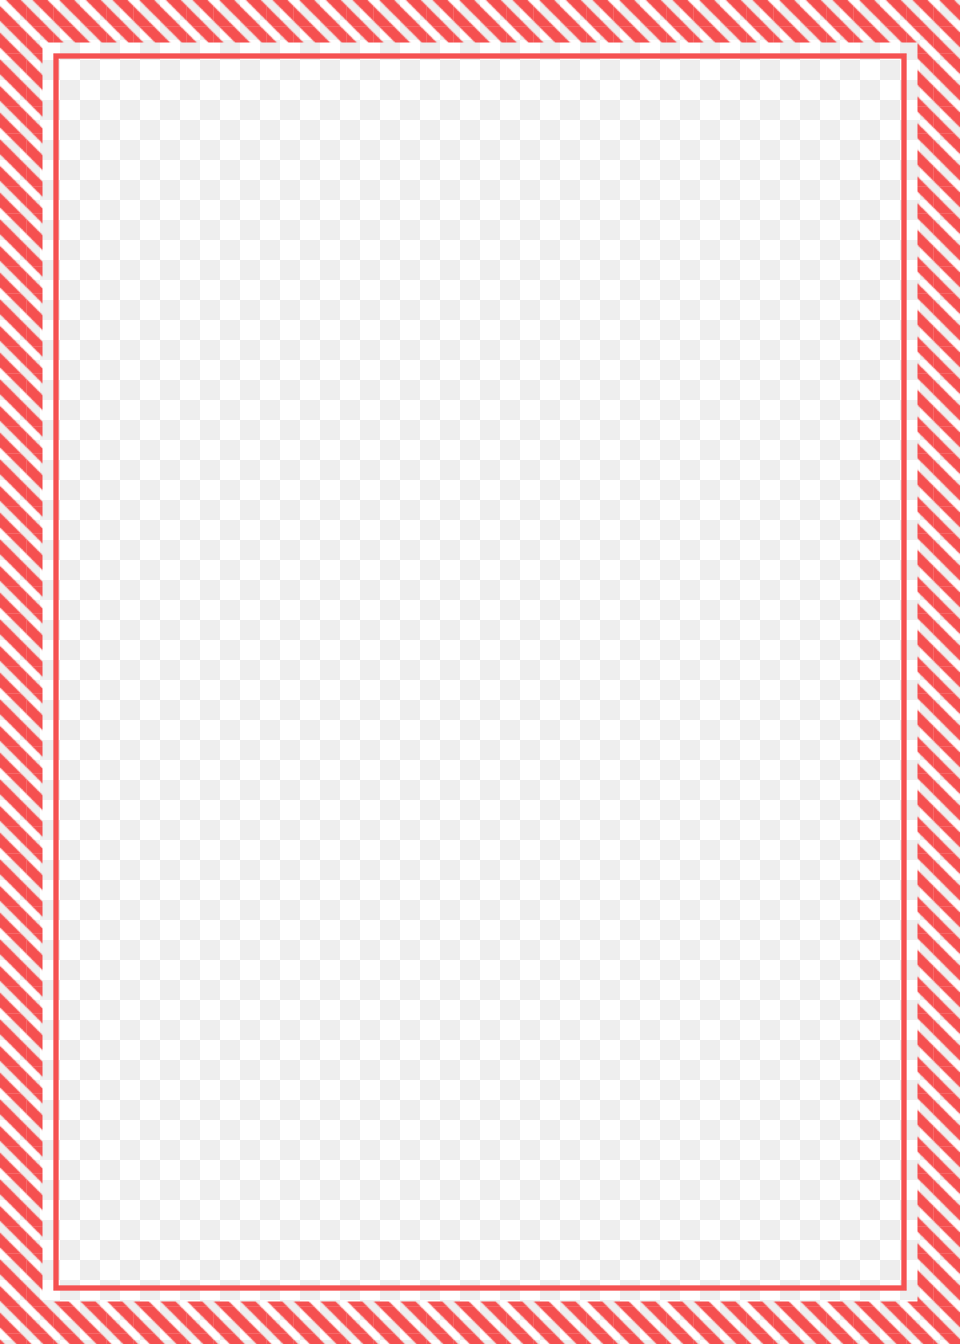 Red Candy Cane Stripe Border Thin Red Christmas Border, Home Decor, Blackboard Free Png Download